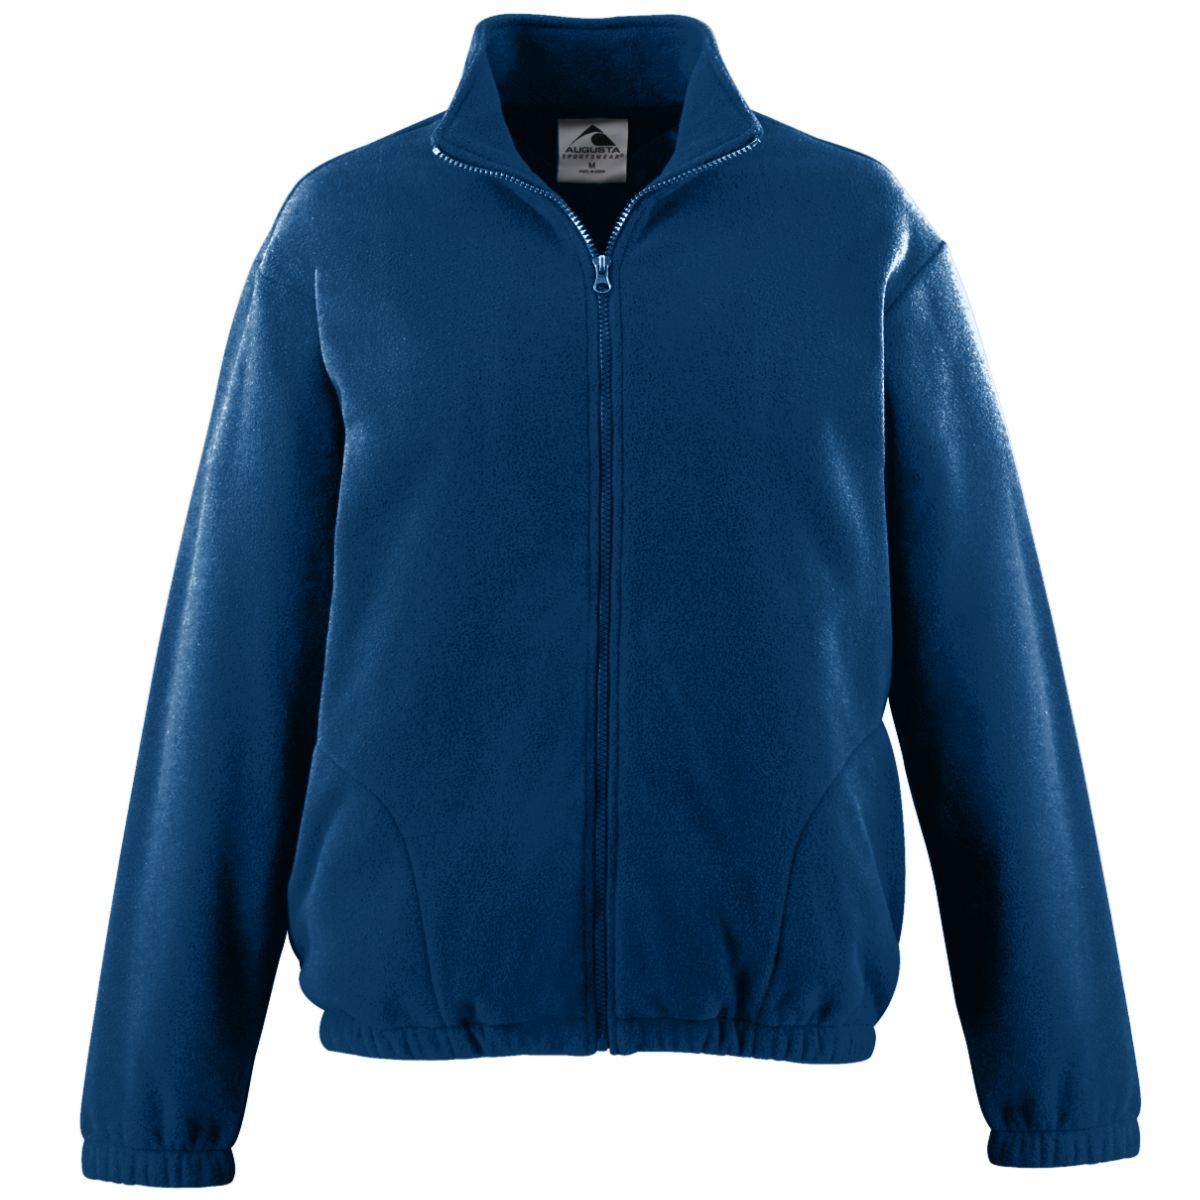 Augusta Sportswear Youth Chill Fleece Full Zip Jacket in Navy  -Part of the Youth, Youth-Jacket, Augusta-Products, Outerwear product lines at KanaleyCreations.com